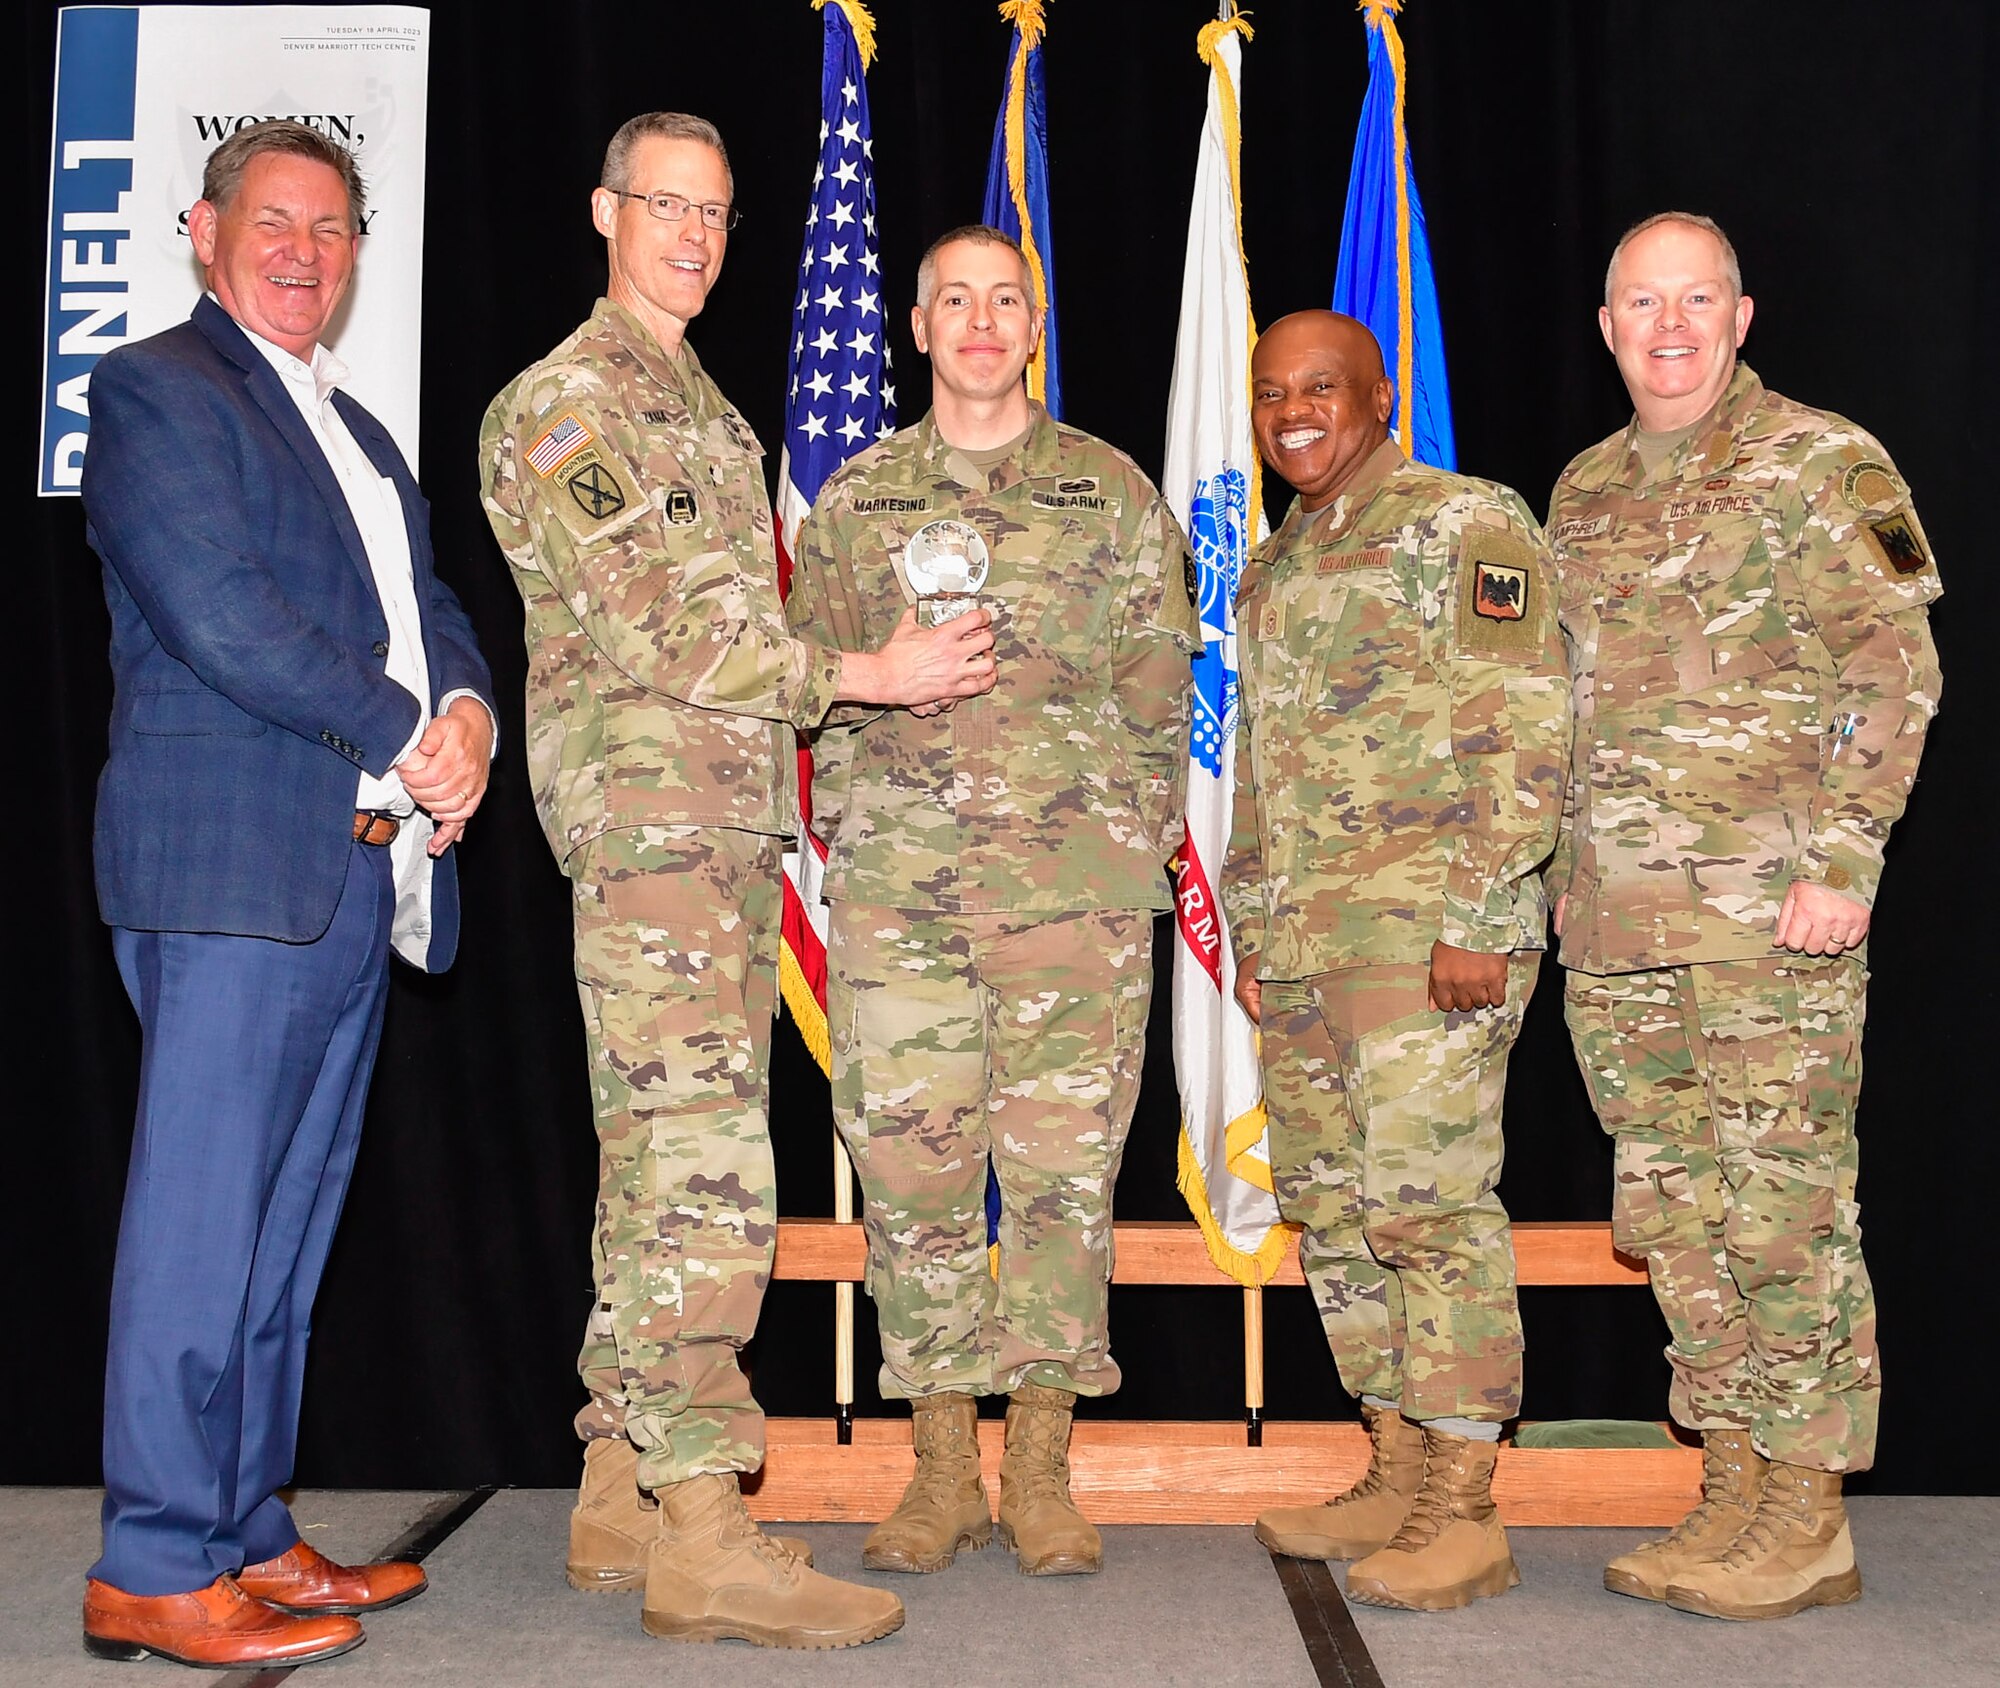 Left to right, Ambassador Dennis Hankins, foreign policy advisor to the National Guard Bureau; Maj. Gen. William Zana, director of Strategic Plans and Policy and International Affairs for NGB; Lt. Col. Christopher Markesino from the Oregon National Guard; Senior Enlisted Advisor Tony Whitehead, SEA to the chief, National Guard Bureau; and Col. Scott Humphrey, chief of the National Guard Bureau International Affairs Division, during an awards presentation at the annual State Partnership Program conference April 20, 2023.